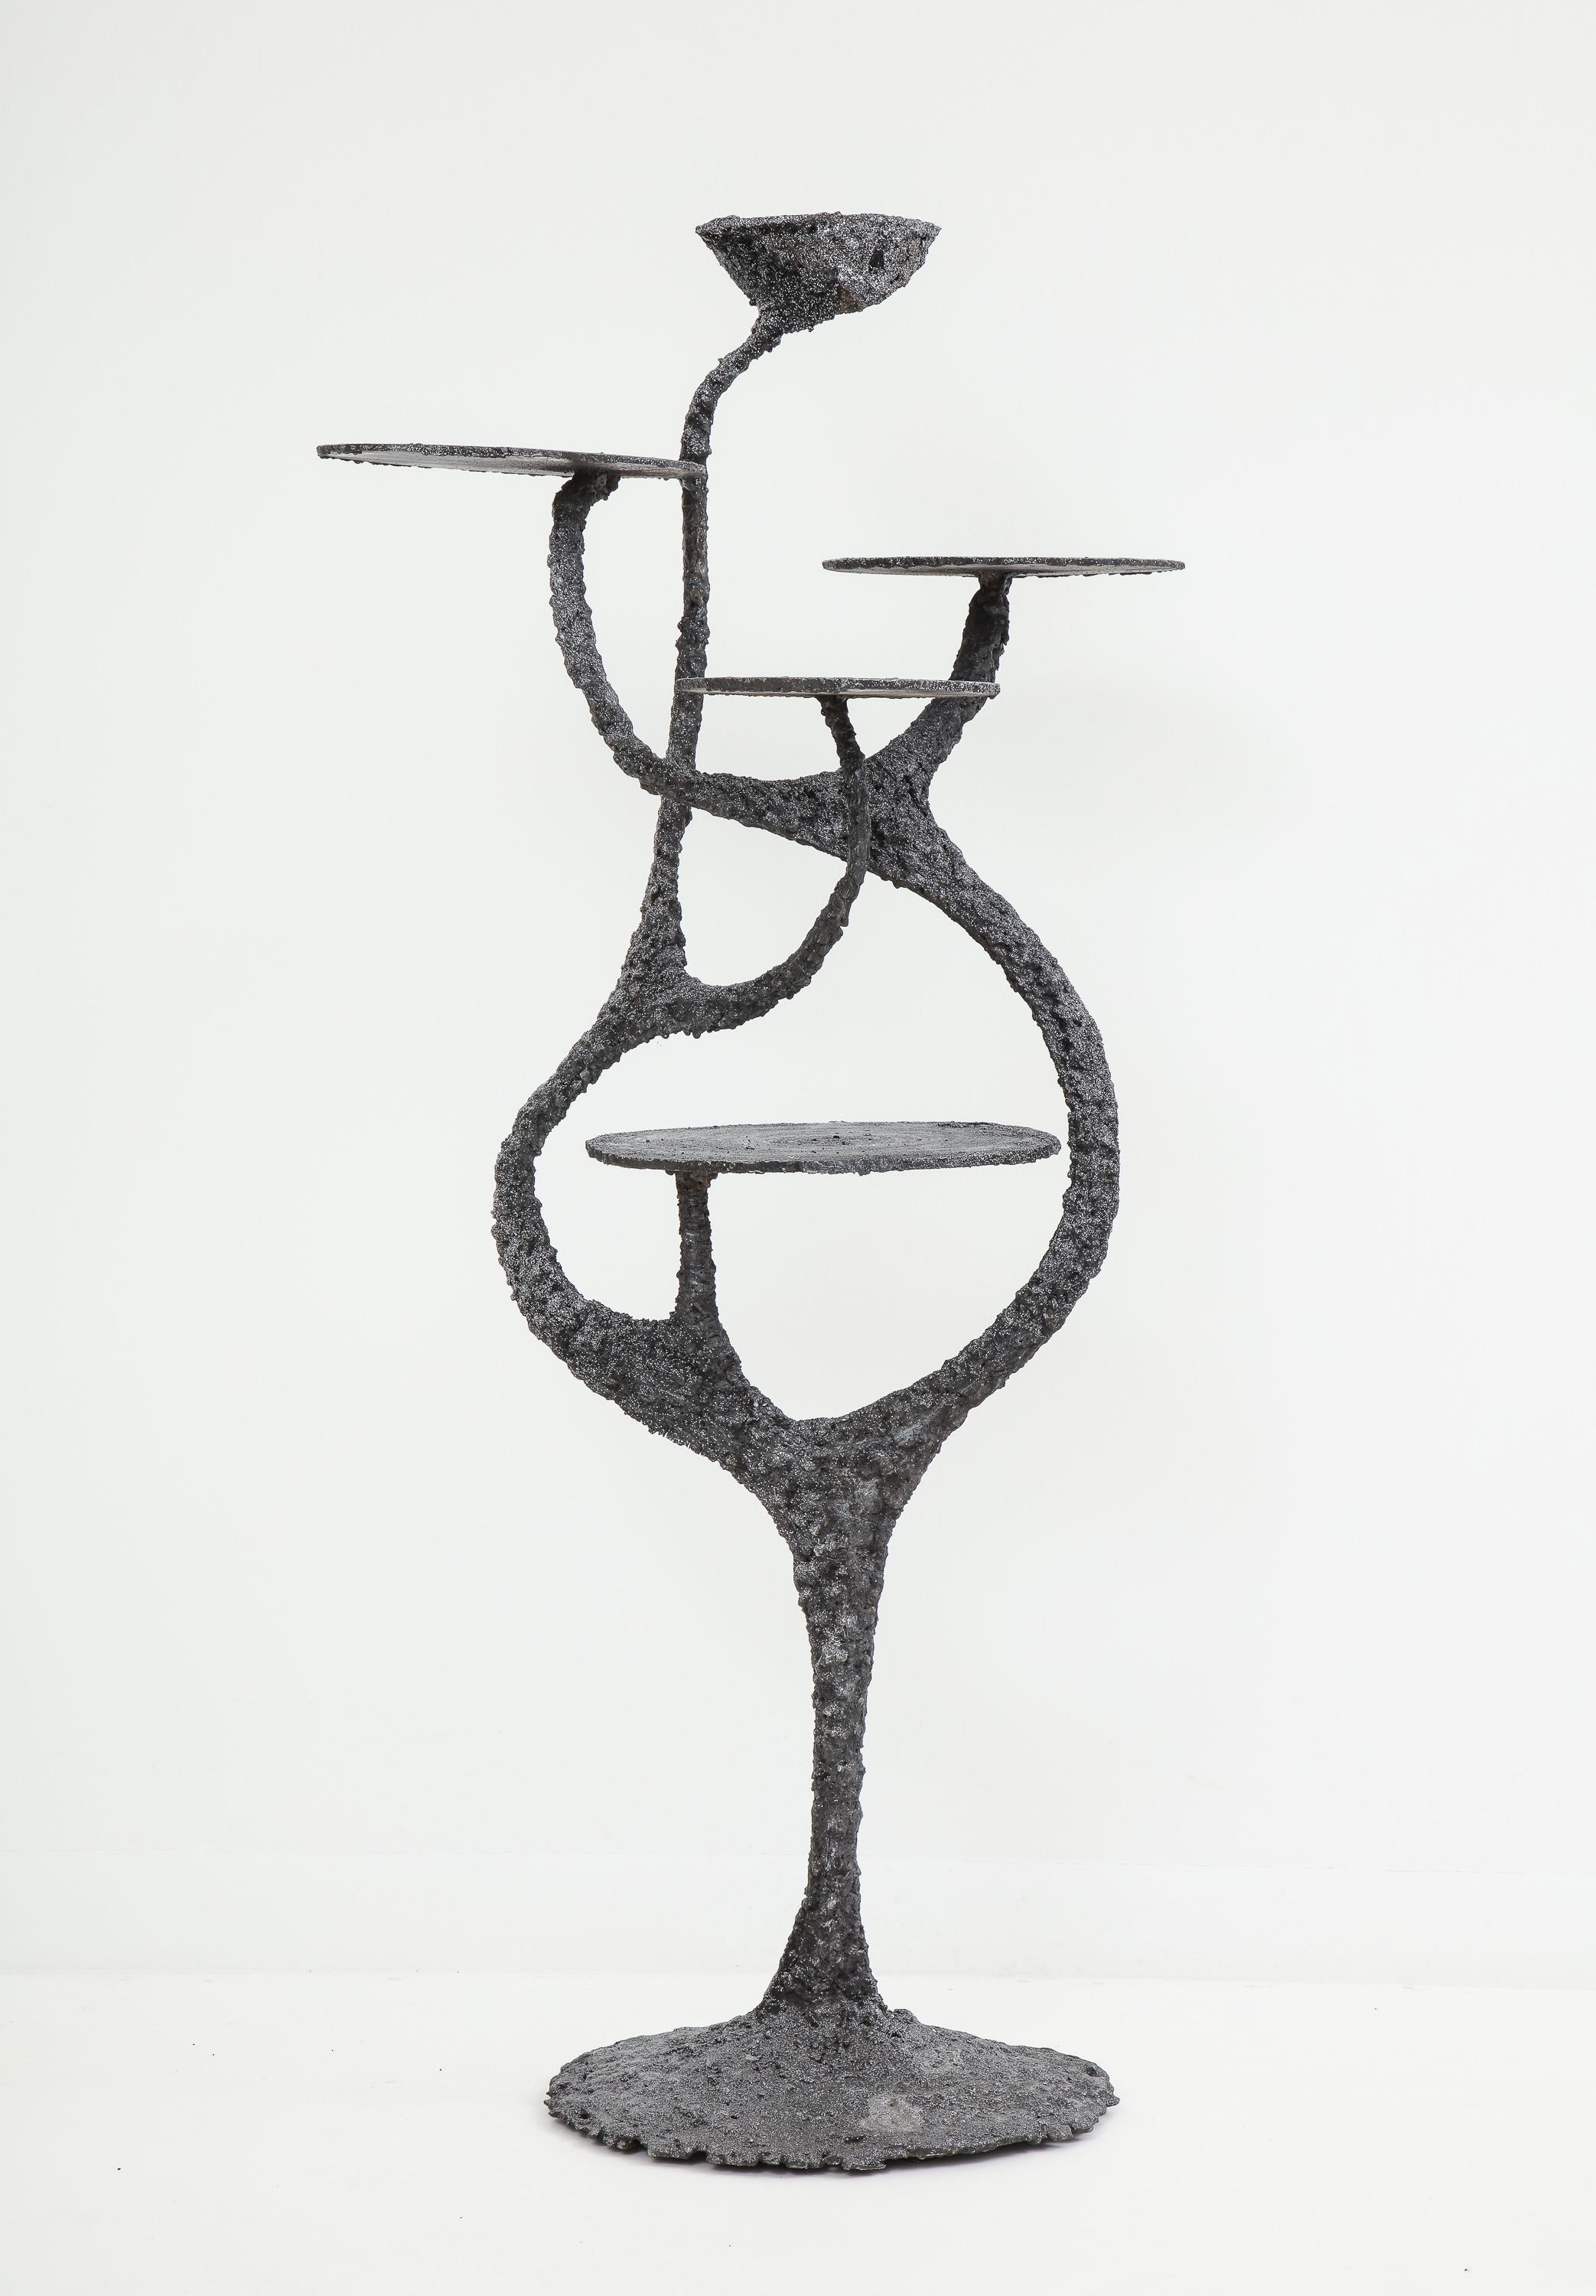 Stand or étagère of blackened steel with an ash metallic wash by American artist James Bearden, made in 2017. An early entry from his sinuous Medusa series, with five round surfaces for display. Bearden's work was featured in a 2020 solo exhibition